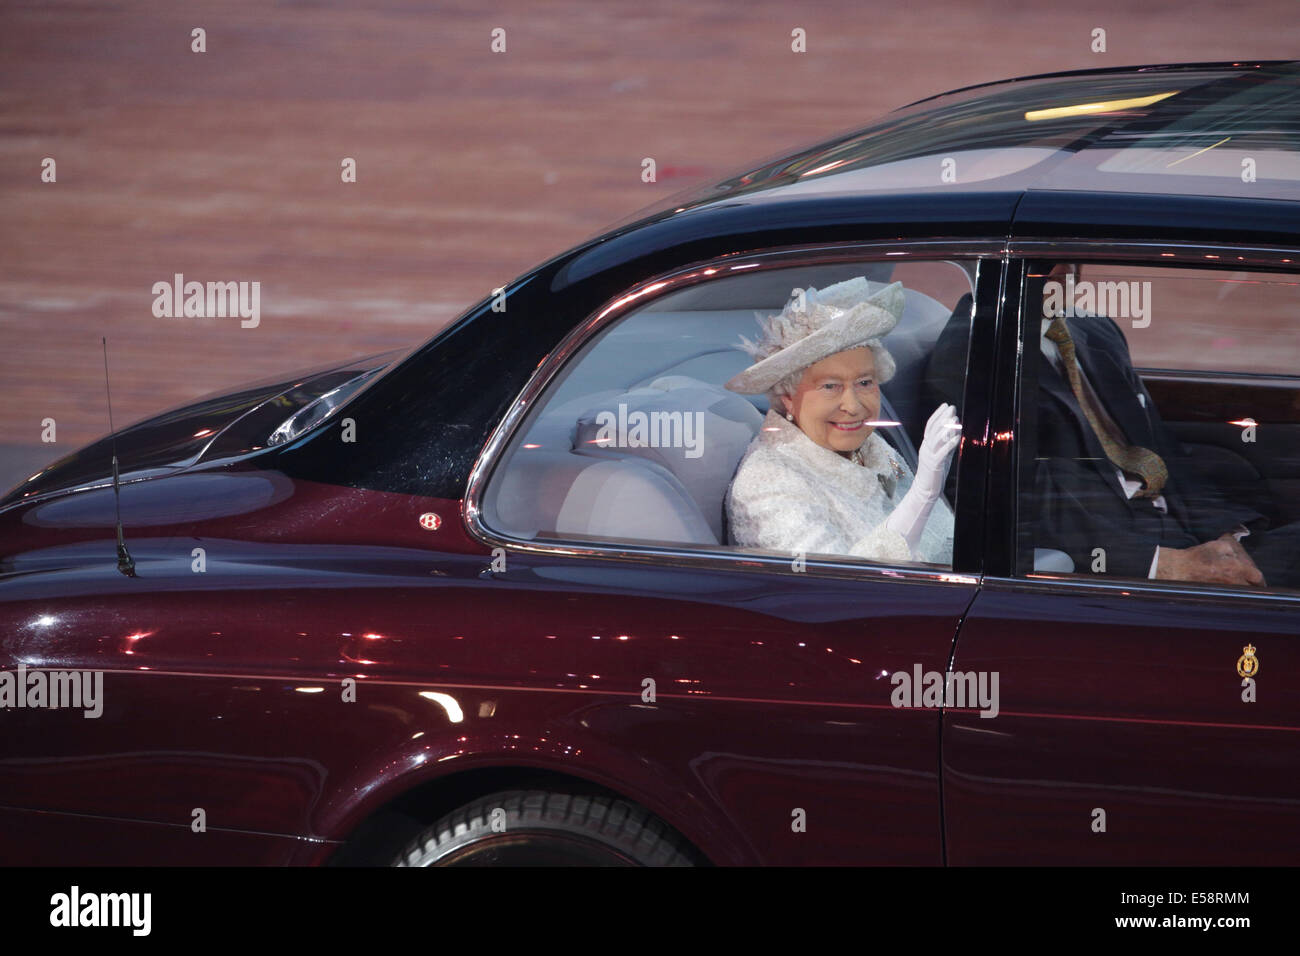 Celtic Park, Glasgow, Scotland, UK. 23rd July, 2014. Her Majesty Queen Elizabeth II arriving at the Glasgow 2014 Commonwealth Games Opening Ceremony in a car Stock Photo